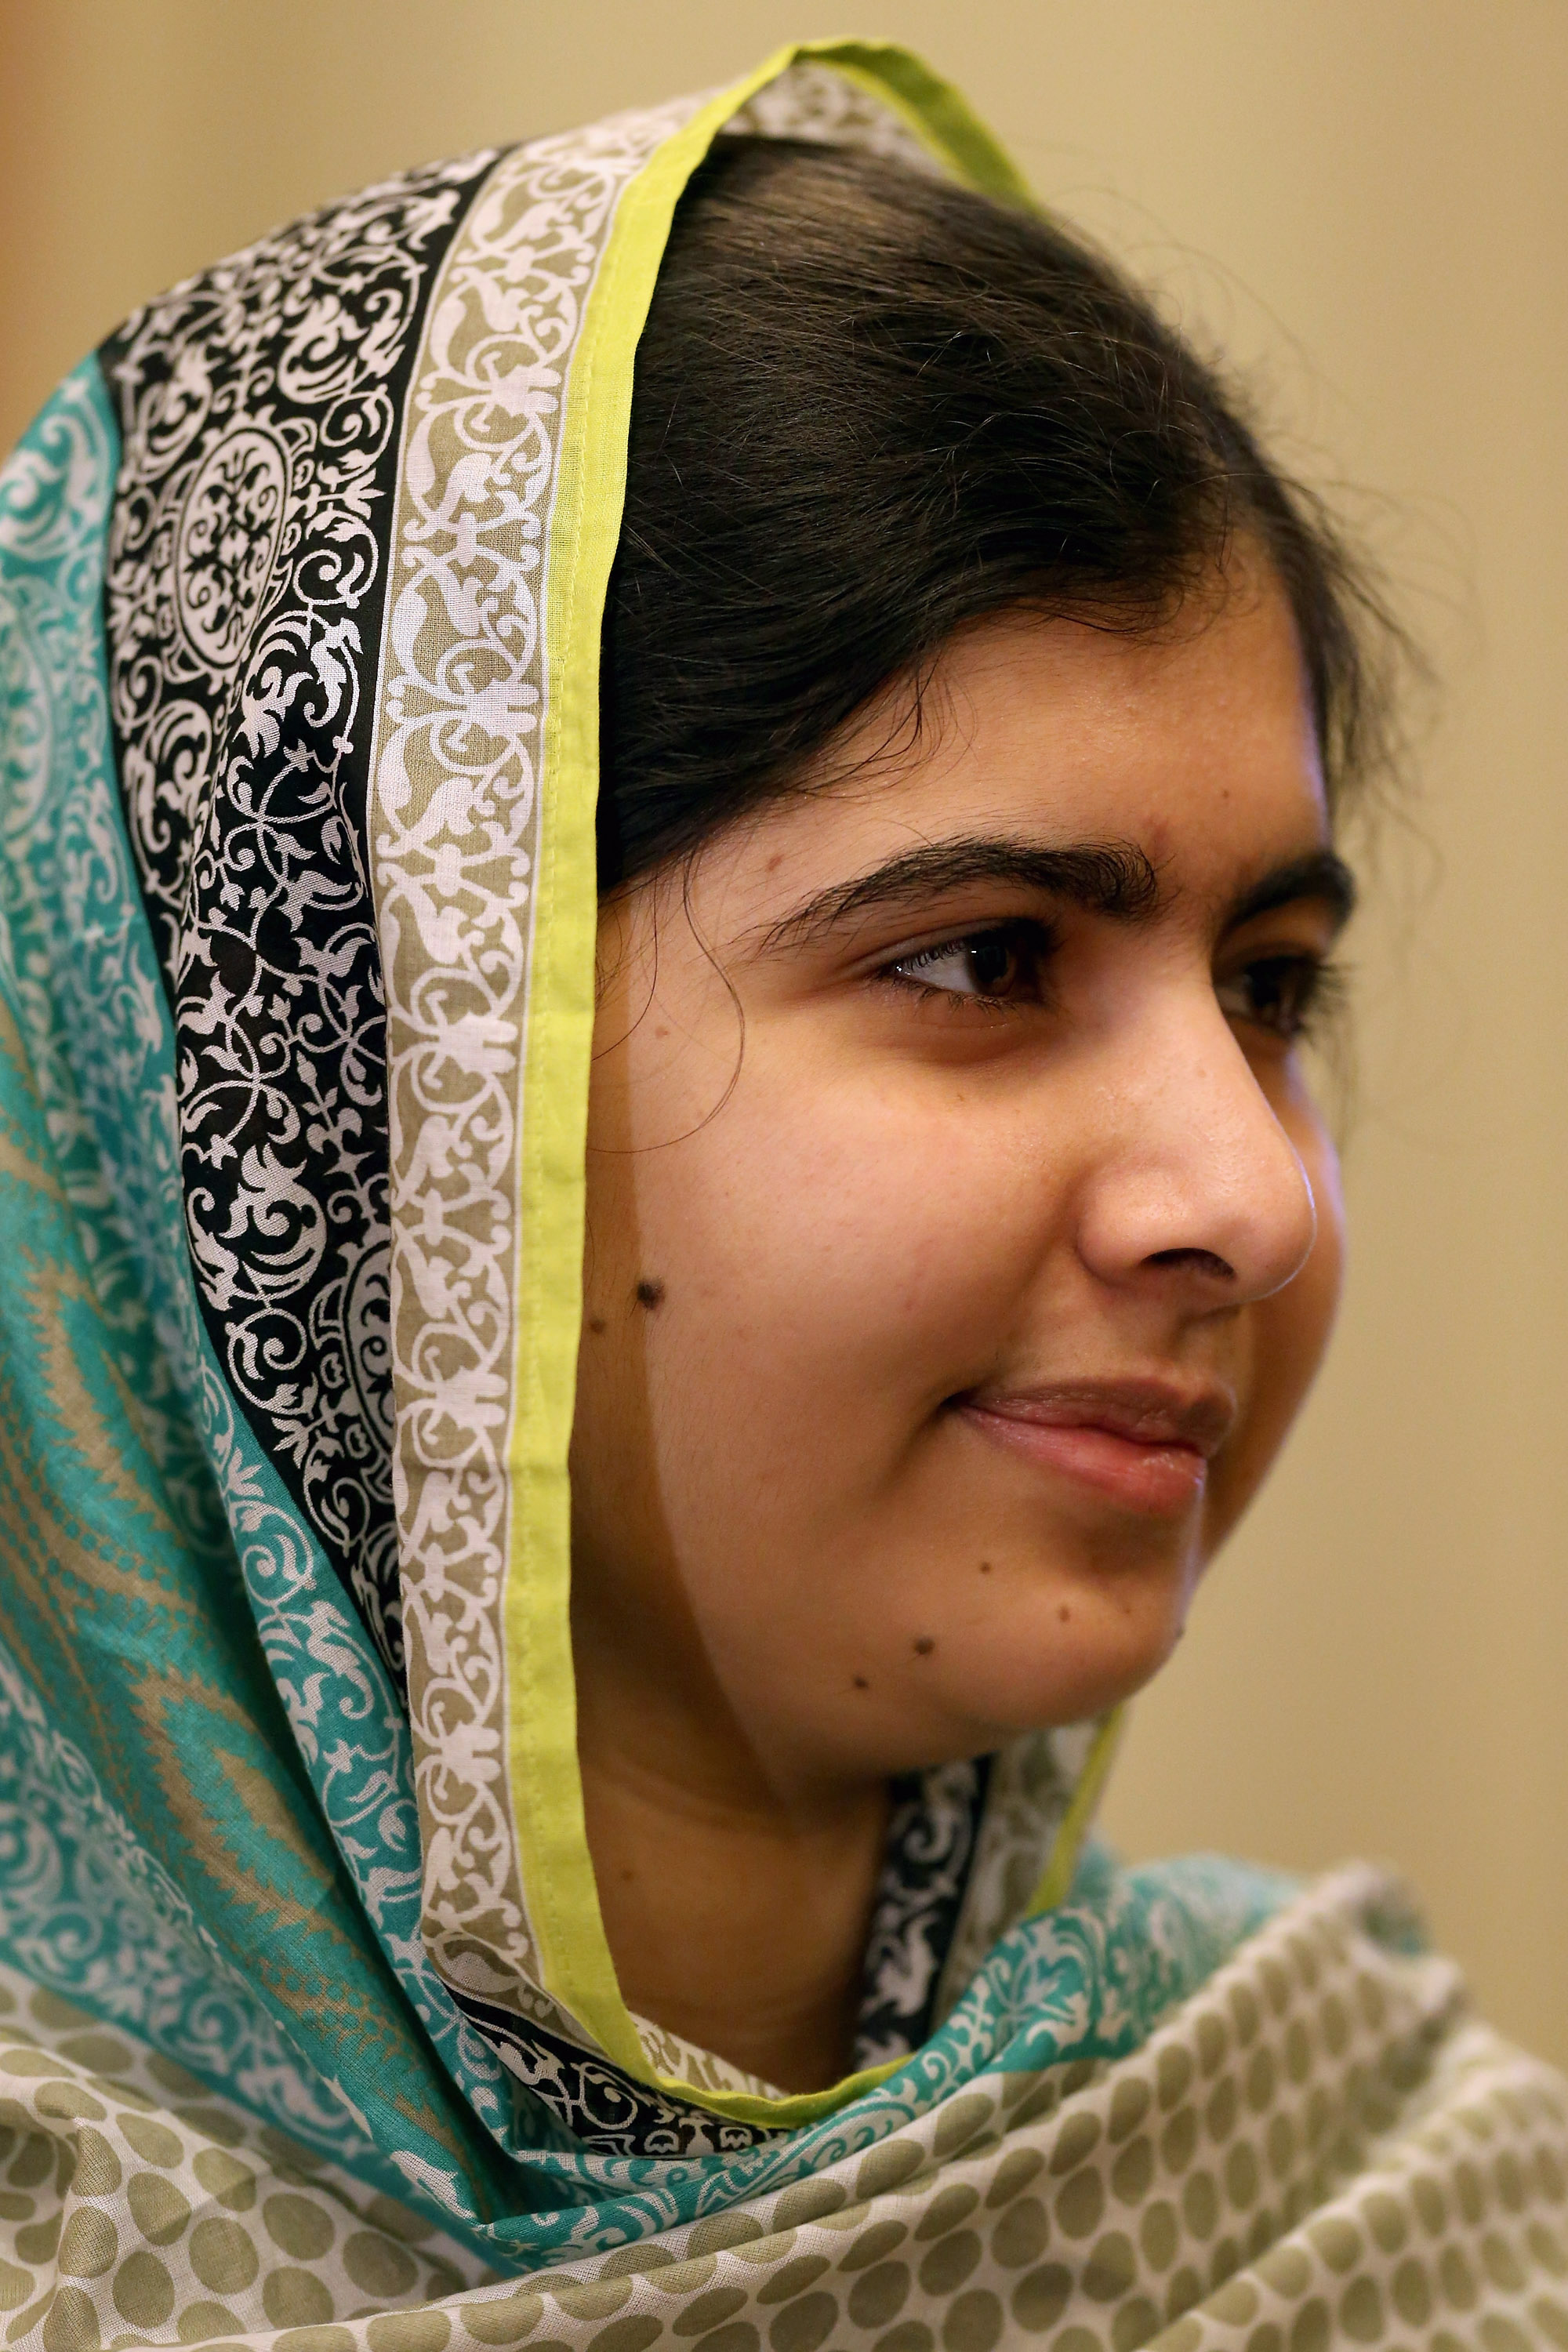 2014 Nobel Peace Prize Laureate Malala Yousafzai (L) poses for photographs before a meeting with Senate Minority Whip Richard Durbin (D-IL) about the importance of girls' education and the need for universal secondary education world-wide in his office at the U.S. Capitol June 23, 2015 in Washington, DC. (Chip Somodevilla—Getty Images)